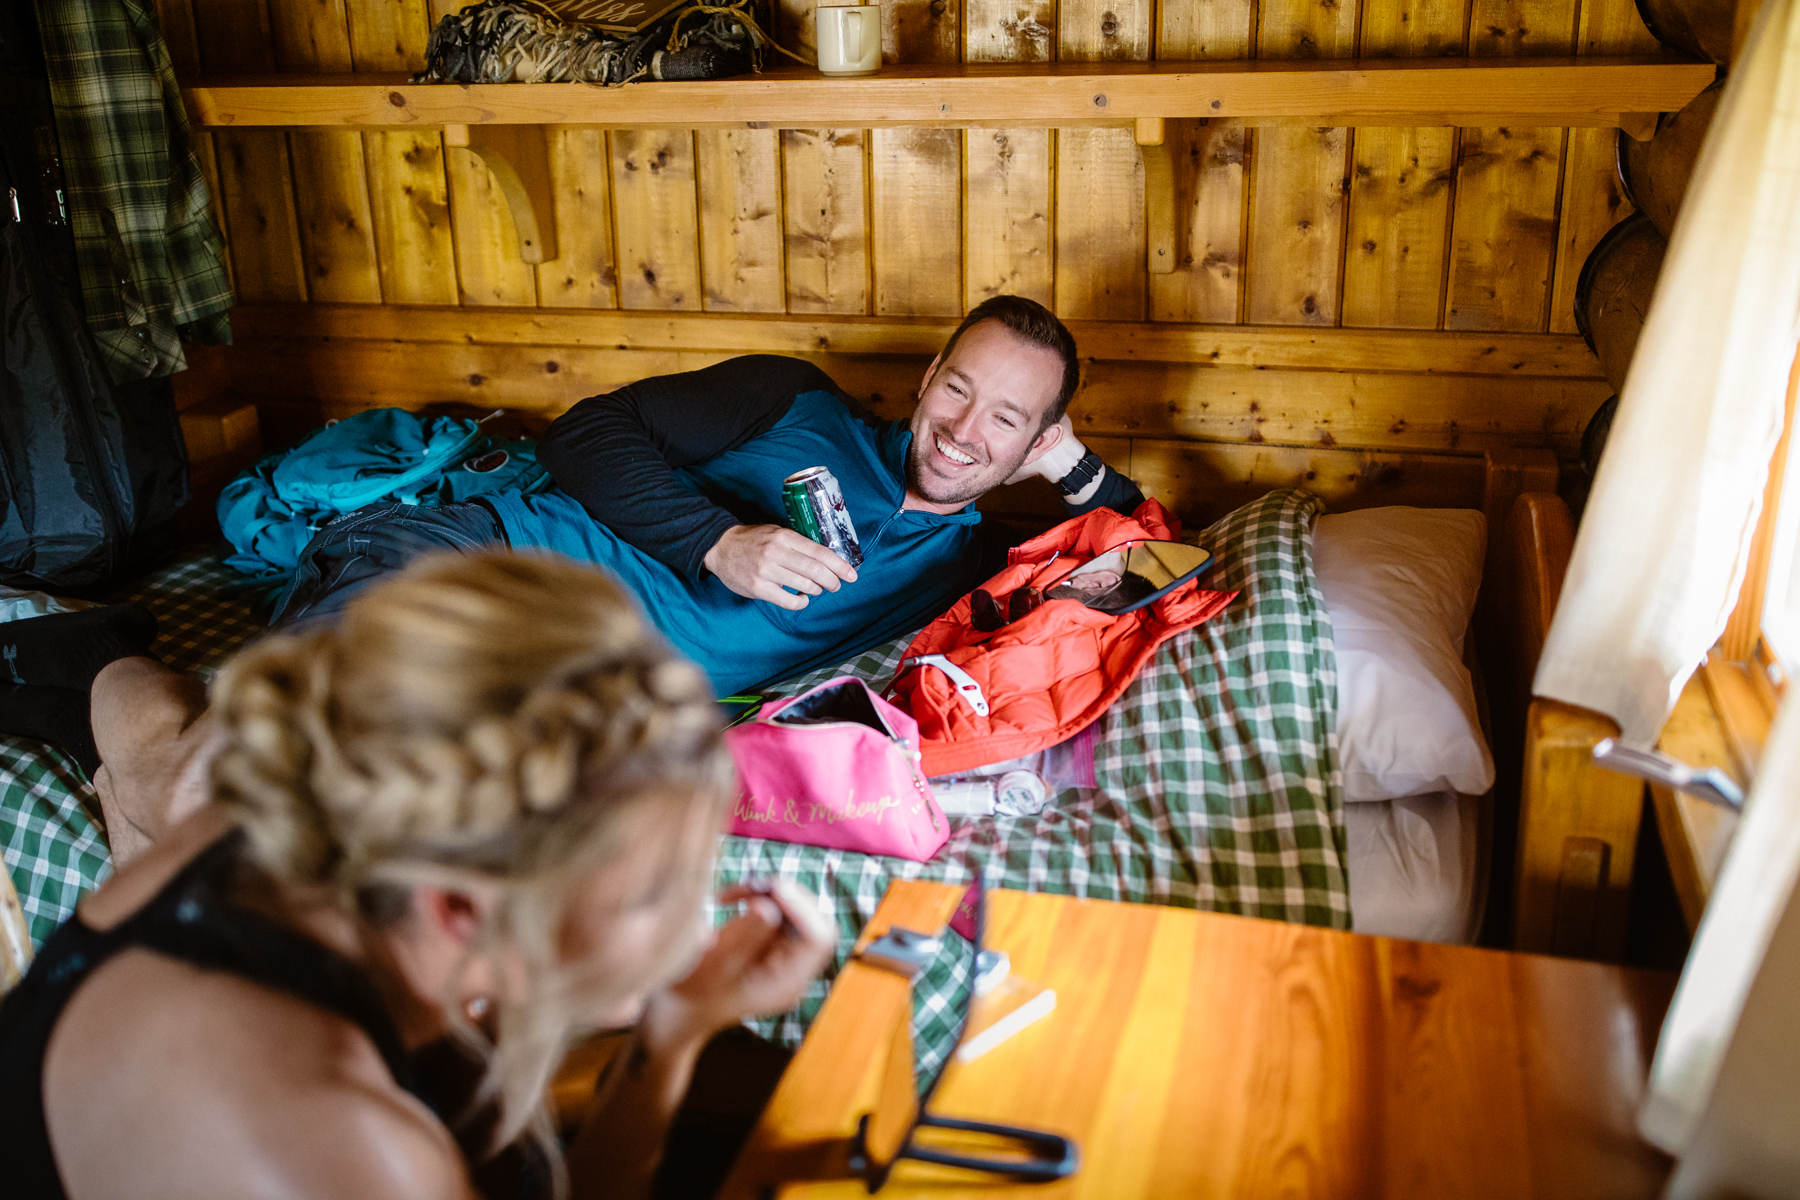 Mount Assiniboine Elopement Photographers at a Backcountry Lodge - Photo 16